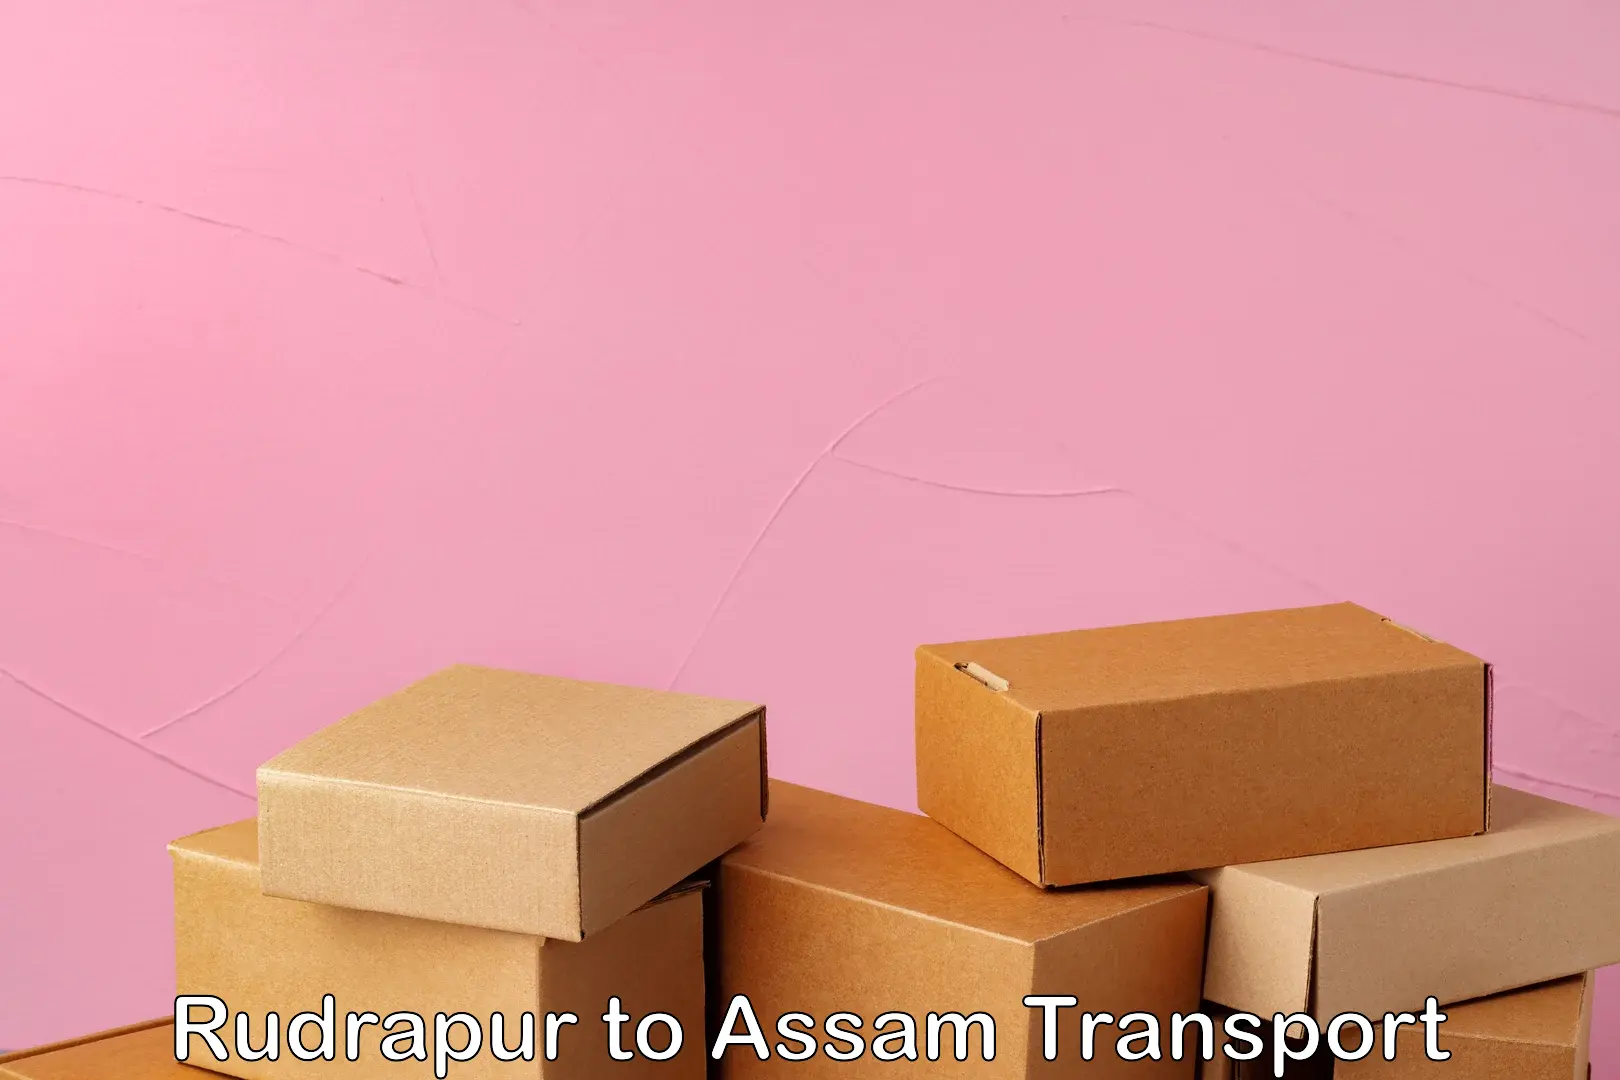 Express transport services in Rudrapur to Karbi Anglong